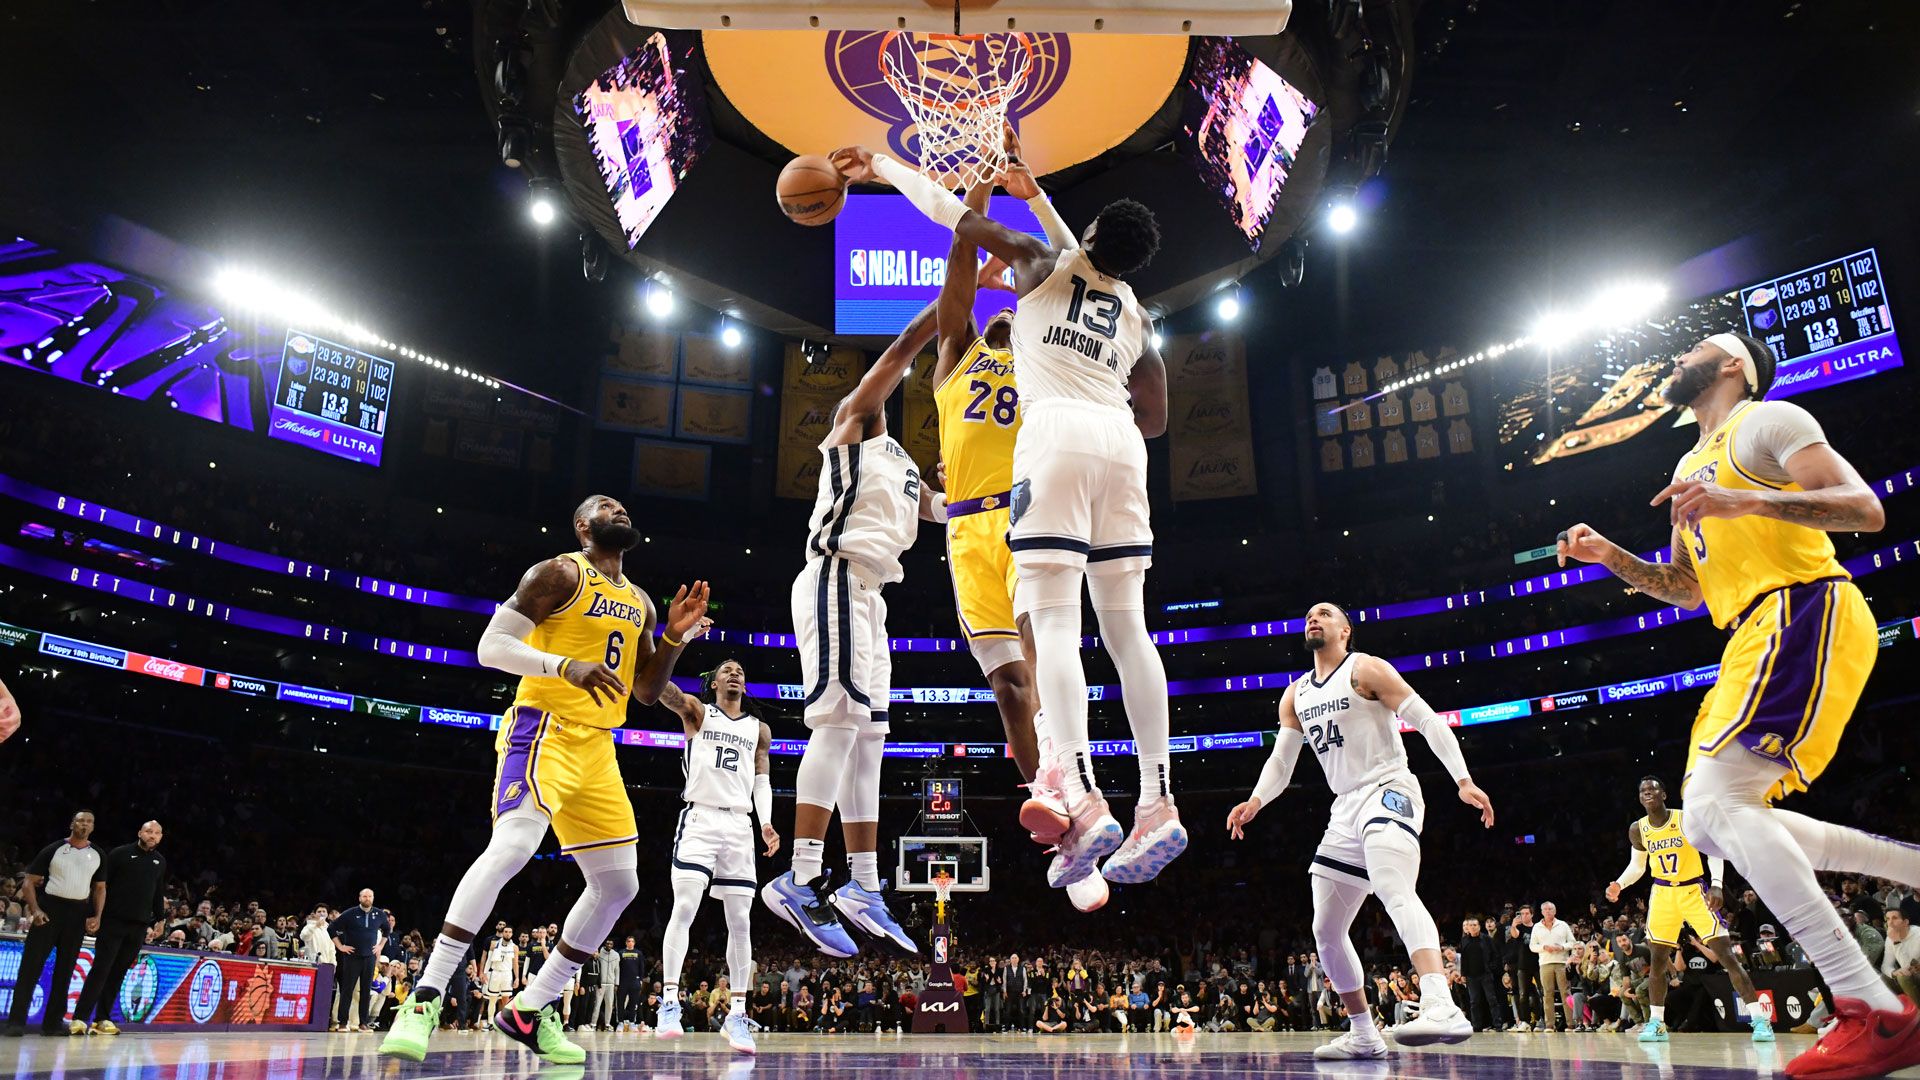 LOS ANGELES, CA - APRIL 24: Jaren Jackson Jr. #13 of the Memphis Grizzlies blocks the shot of Rui Hachimura #28 of the Los Angeles Lakers during Round 1 Game 4 of the 2023 NBA Playoffs on April 24, 2023 at Crypto.Com Arena in Los Angeles, California.